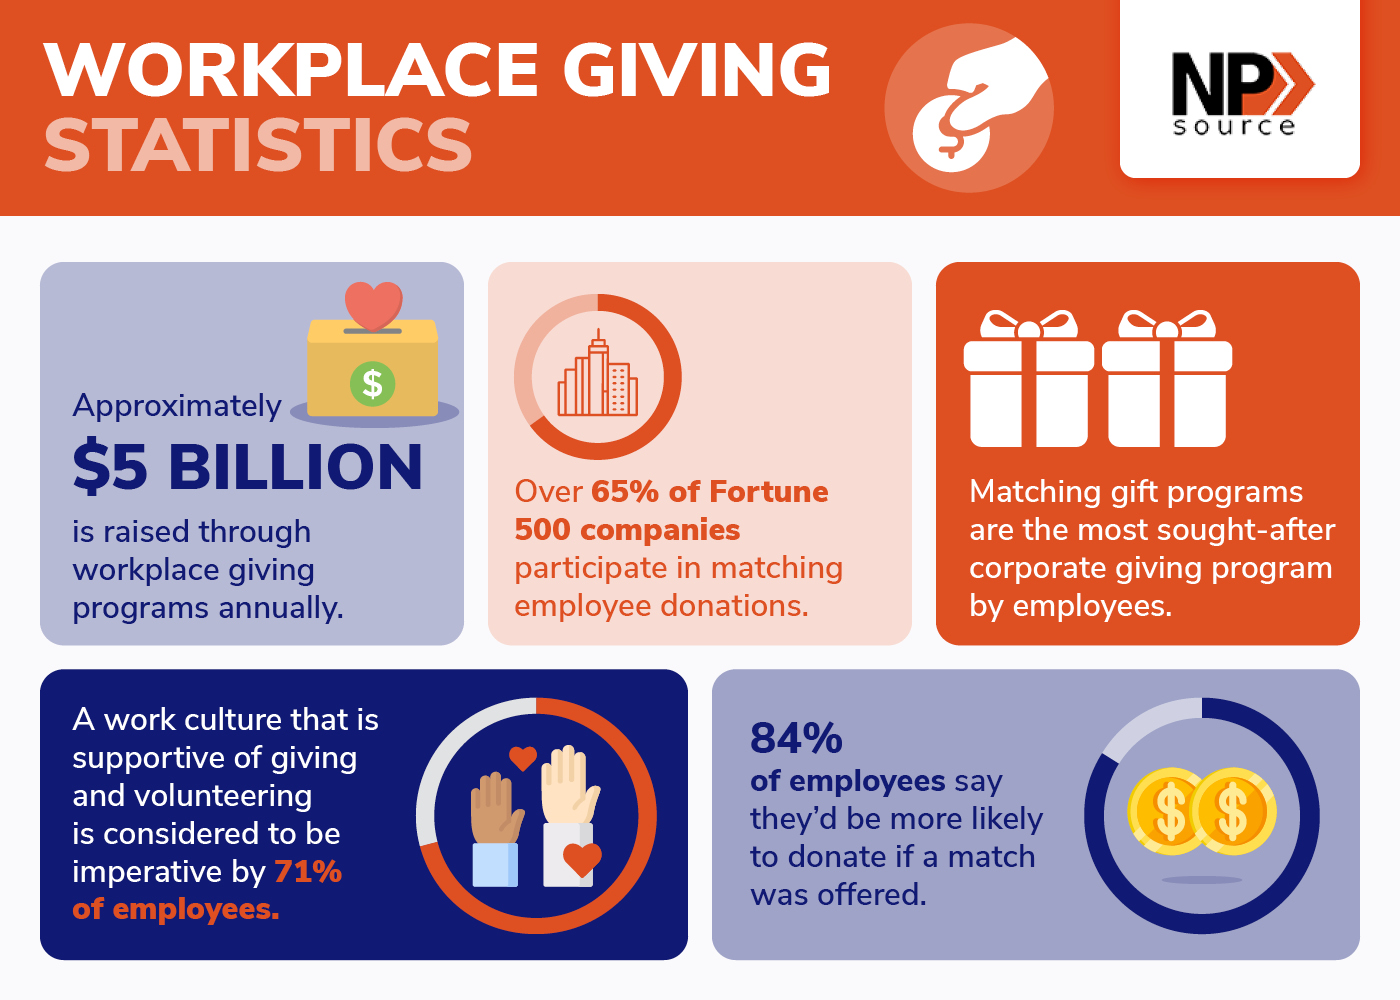 This graphic lists workplace giving statistics to explain why employee giving programs are beneficial to companies.